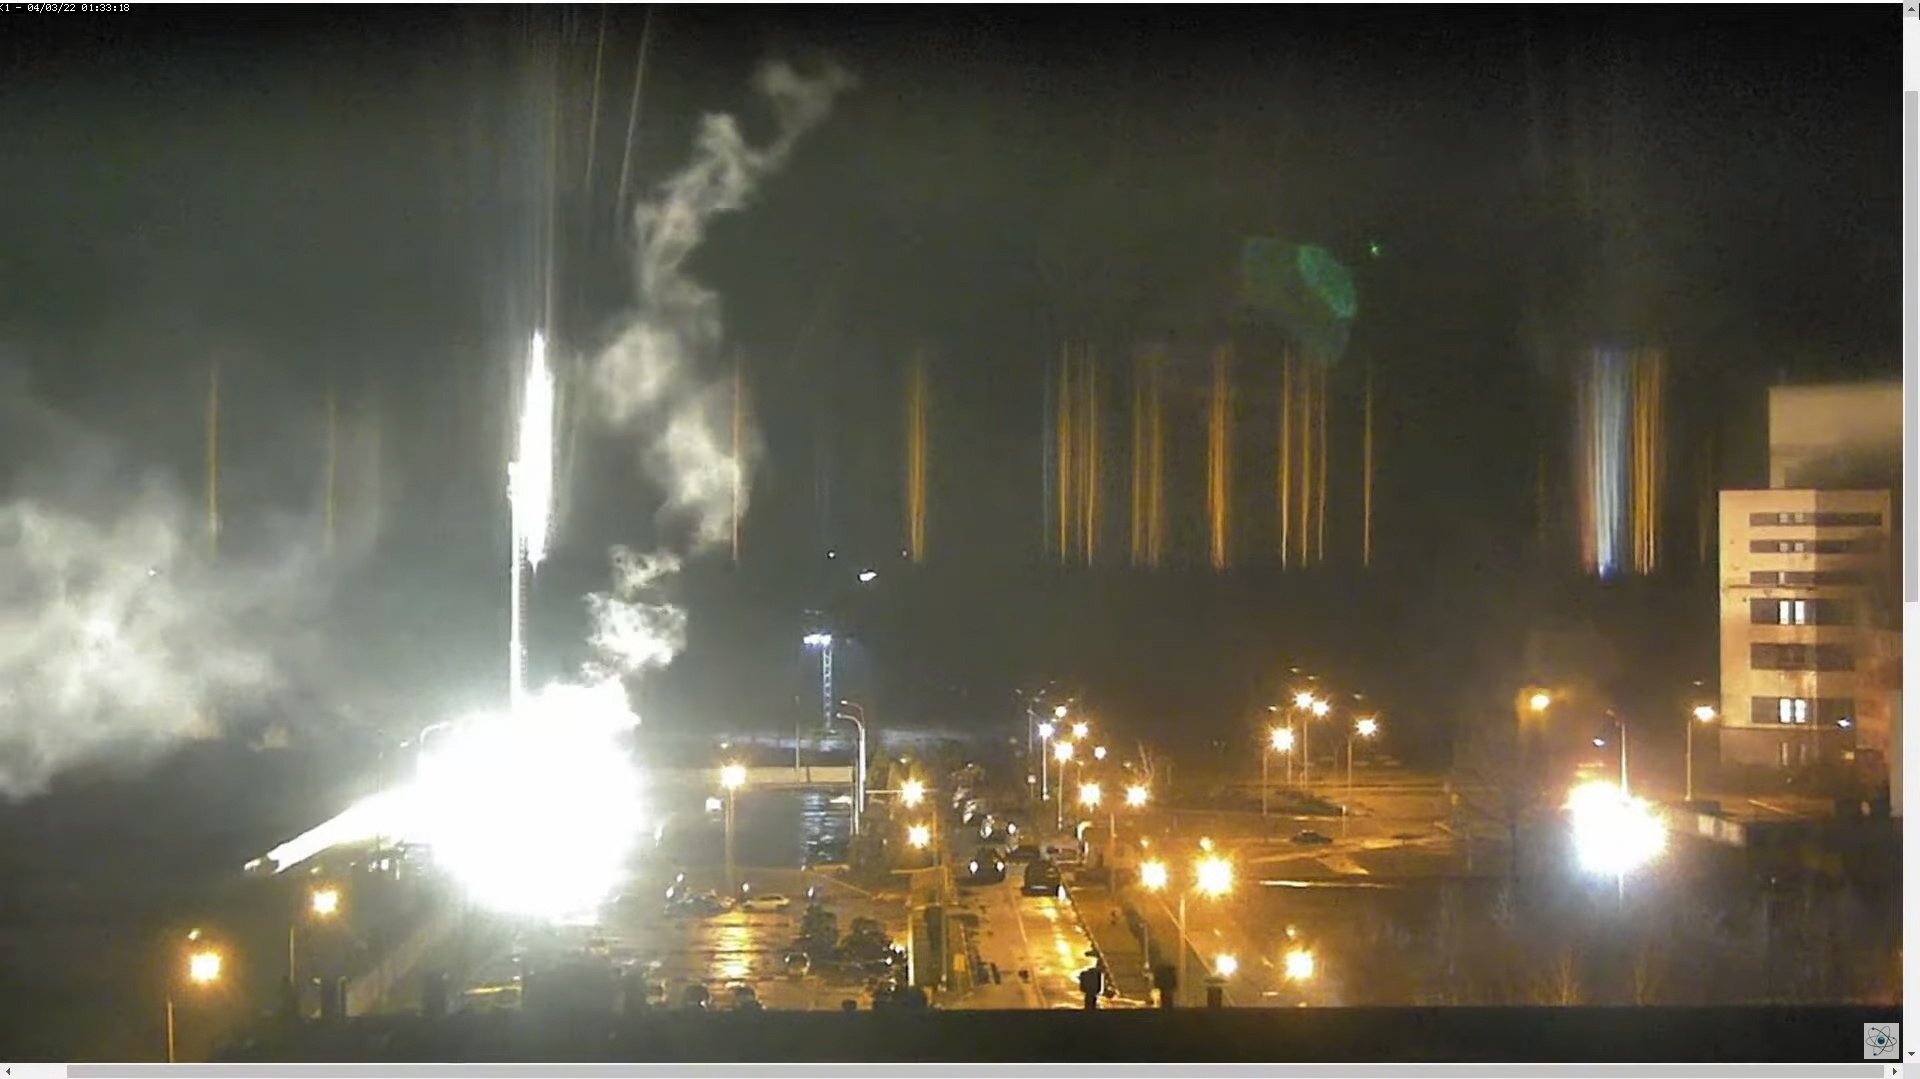 epa09800930 A screen grab taken from a surveillance camera footage the Zaporizhzhya NPP published on YouTube shows a flare landing at the Zaporizhzhia nuclear power plant during shelling, Ukraine, 04 March 2022. A fire at Zaporizhzhia, the largest nuclear power plant in Europe, was was extinguished after shelling by Russia earlier in the day, the State Emergency Service said. Russian troops entered Ukraine on 24 February prompting the country&#039;s president to declare martial law and triggering a series of severe economic sanctions imposed by Western countries on Russia.  EPA/Zaporizhzhya NPP / HANDOUT  HANDOUT EDITORIAL USE ONLY/NO SALES